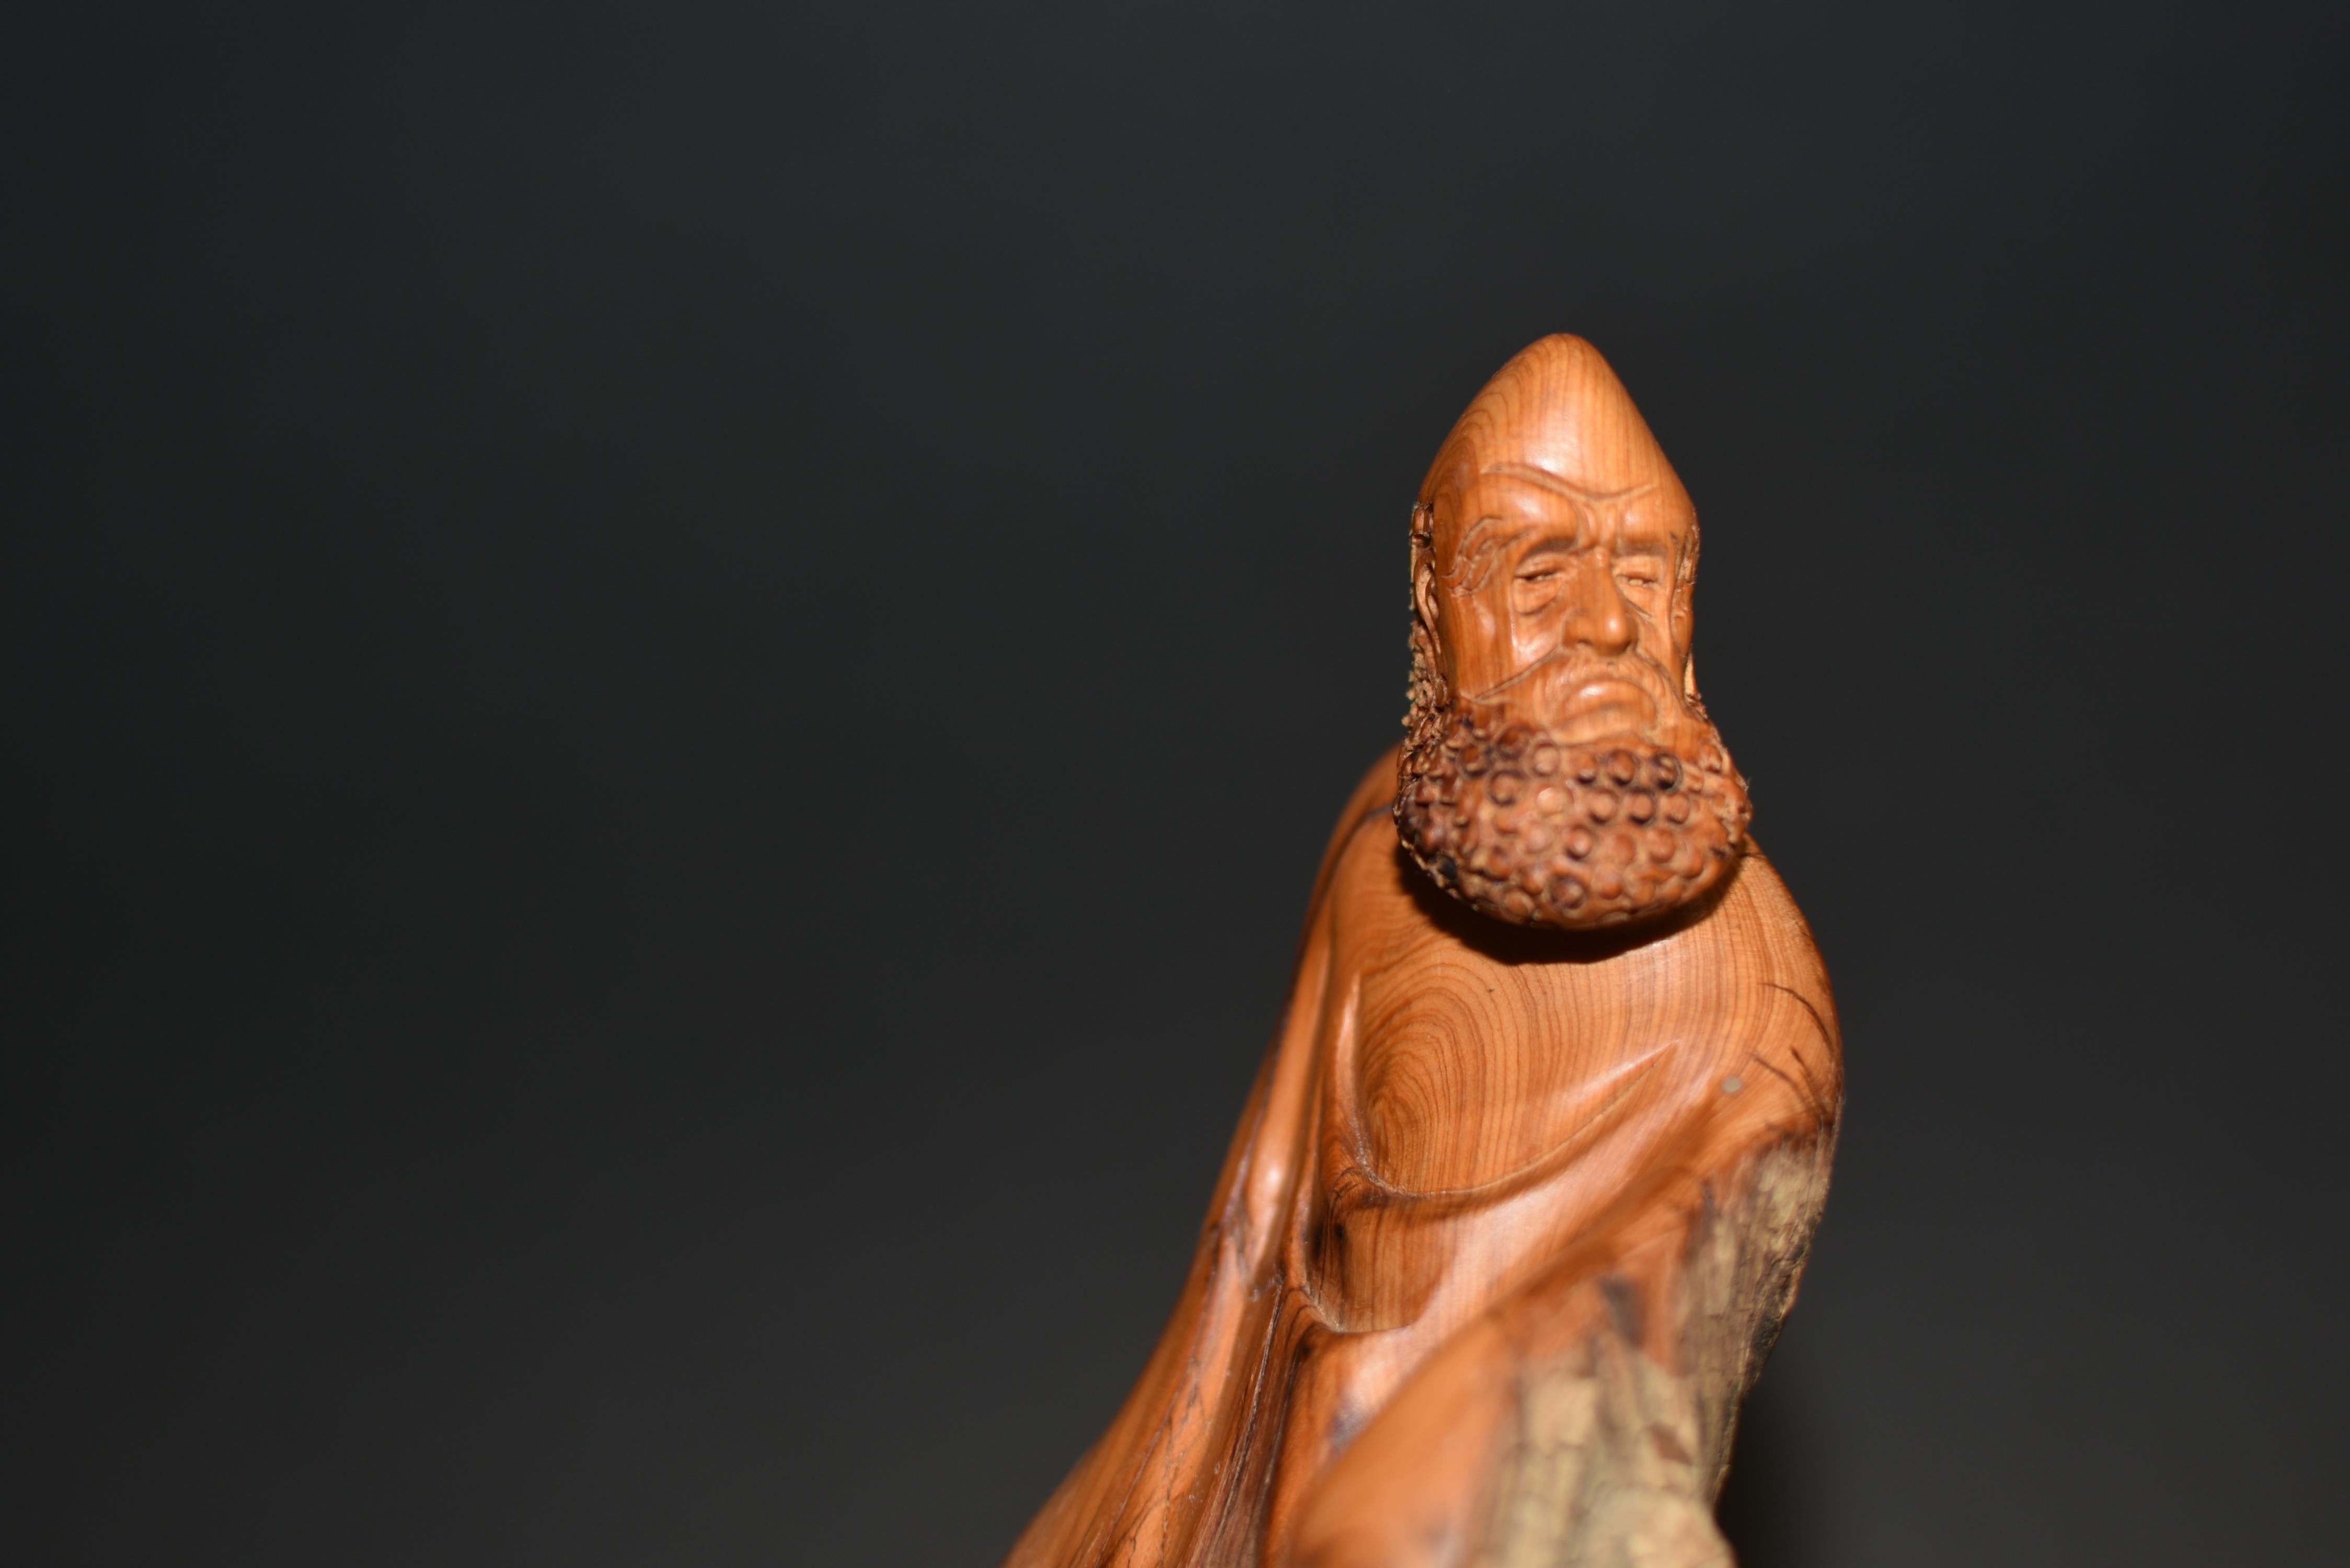 This is a very special statue of the Buddhist monk Bodhidharma (Damo). A legendary Buddhist monk who is believed to be the saint who introduced Buddhism to China, Damo represents 